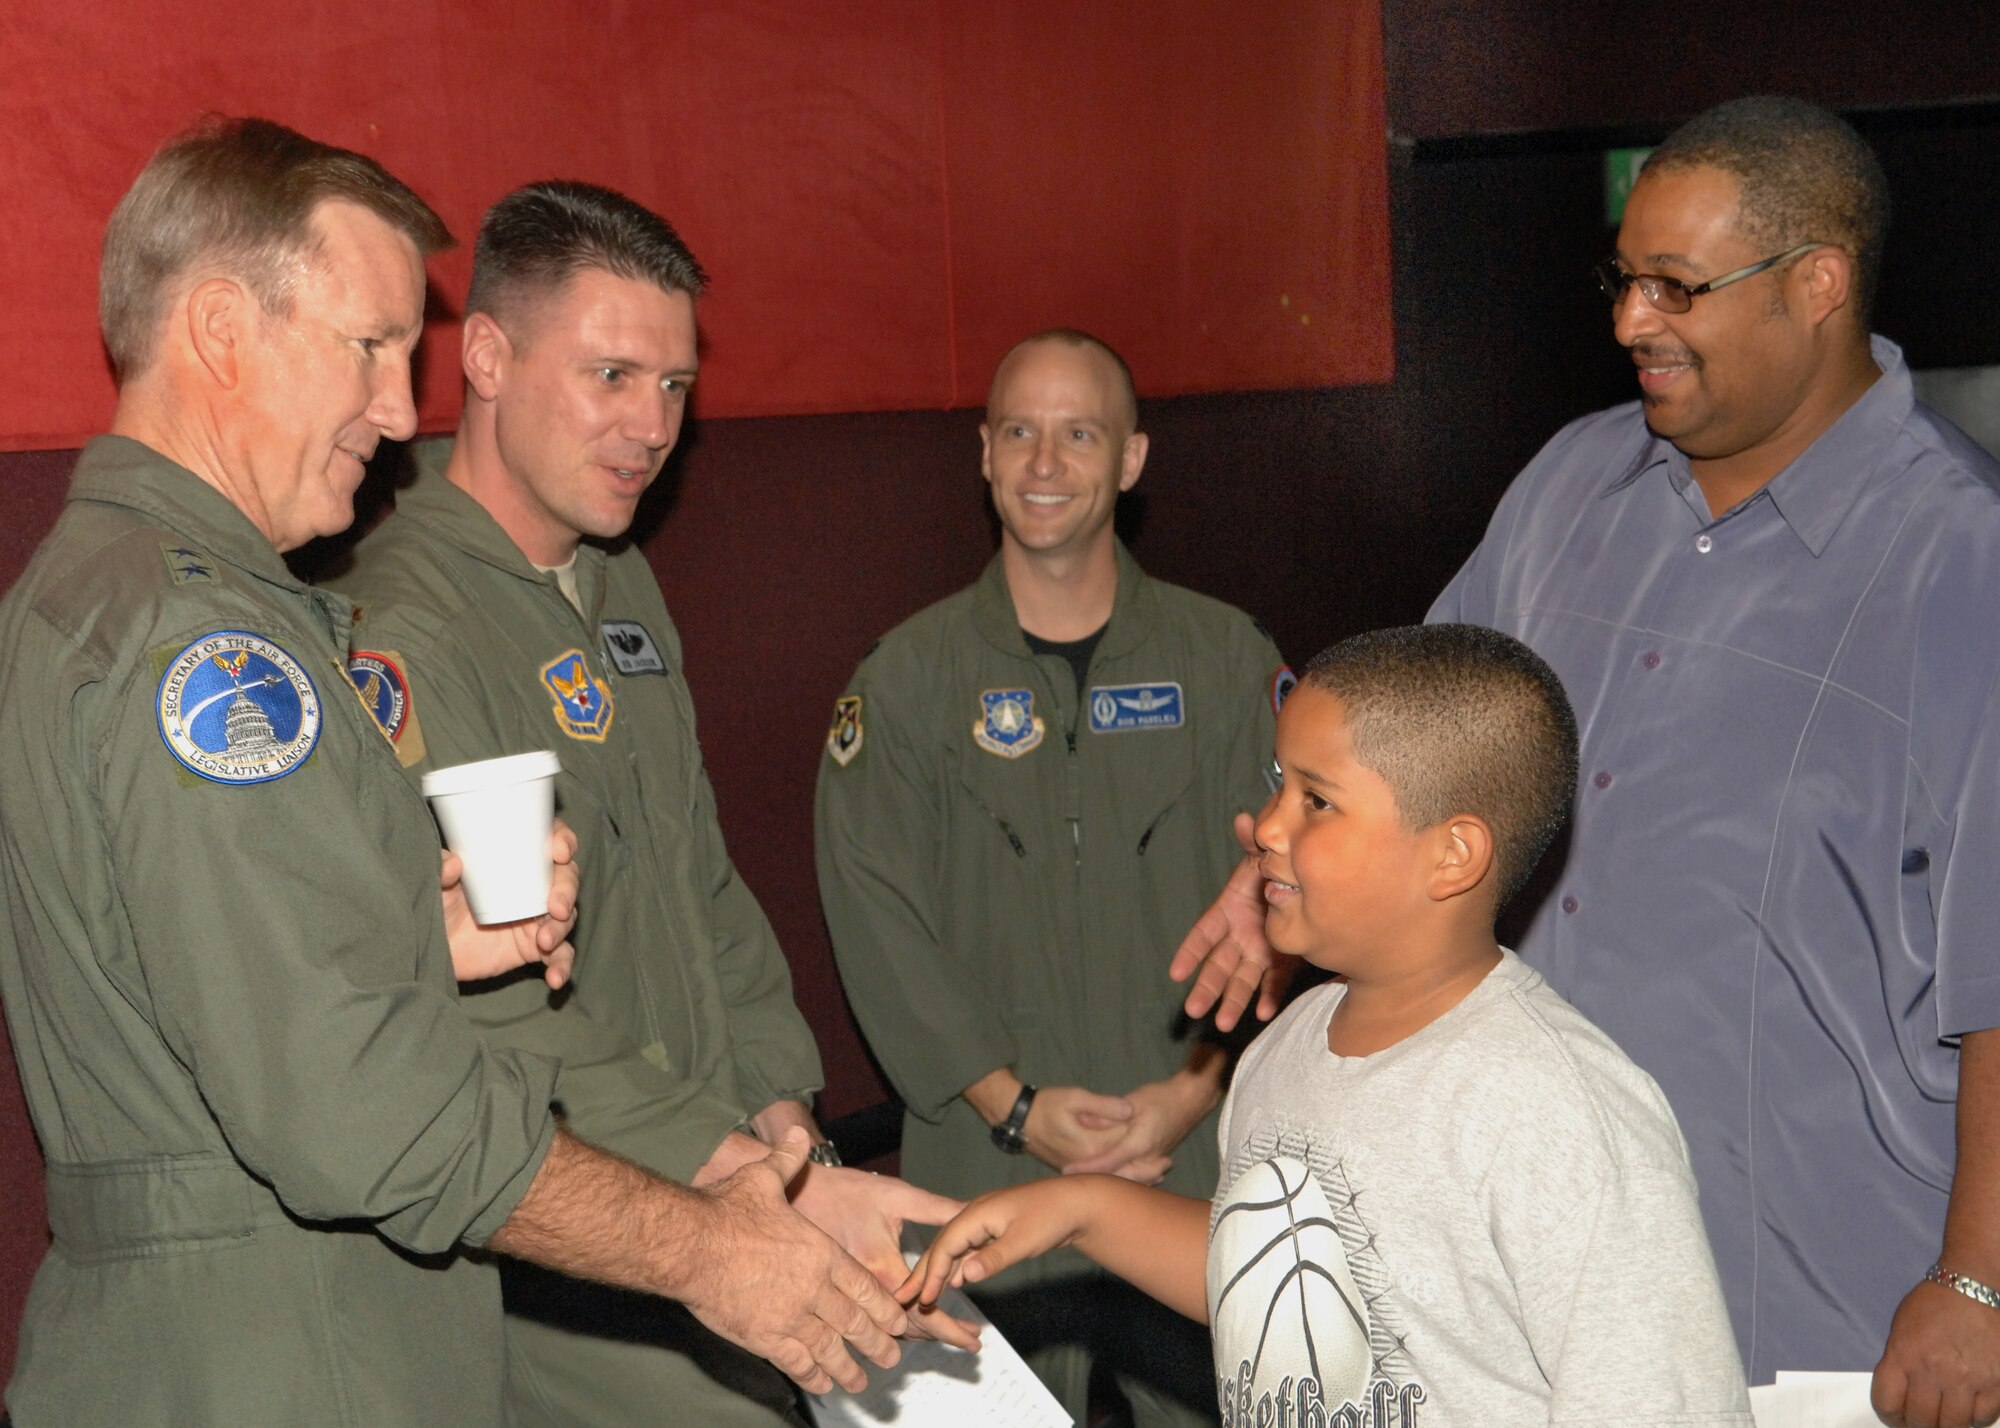 U.S. Air Force Maj. Gen. Hawk Carlisle and Maj. Rob Jackson, special guest fighter pilots, greet attendees of the Los Angeles Air Force Film Festival showing of “Fighter Pilot: Operation Red Flag,” at Canyon Country 10 Theater, Nov. 16, 2008. (U.S. Air Force photo by Senior Airman Ashley Moreno)